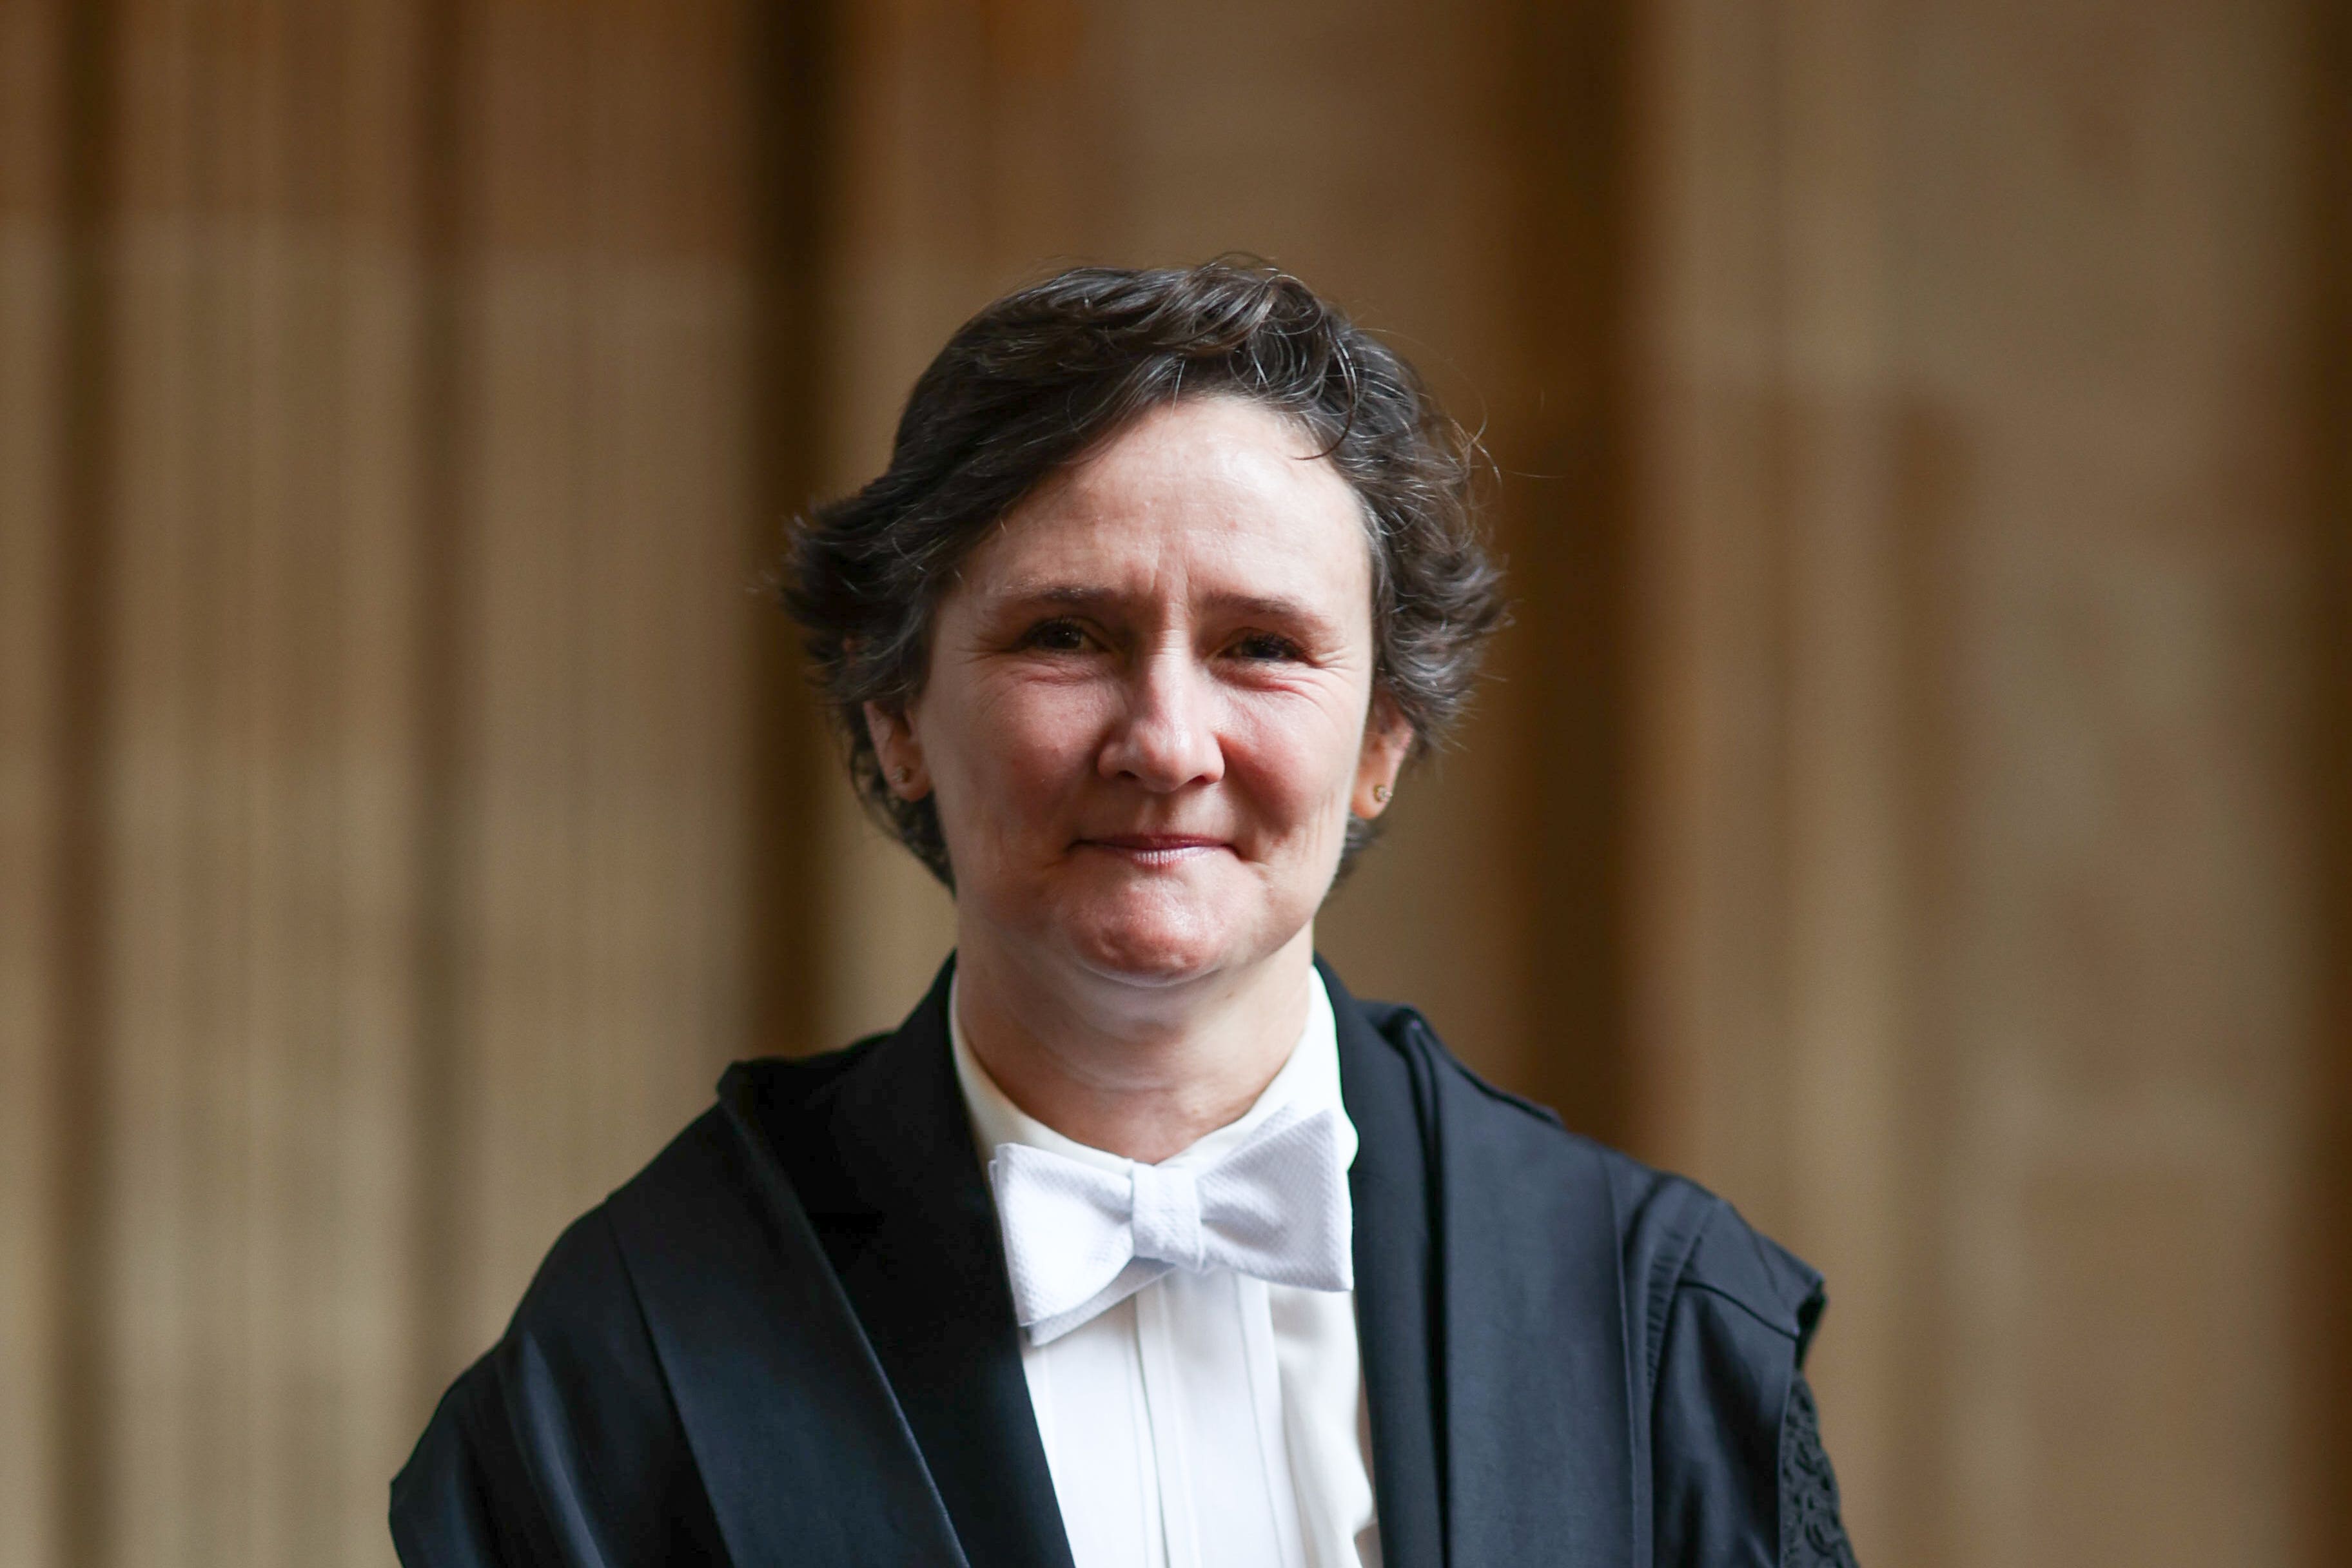 Oxford University vice-chancellor Professor Irene Tracey said she was ‘disturbed’ by ‘hateful rhetoric’ about trans issues on social media (Cyrus Mower/Oxford University/PA)